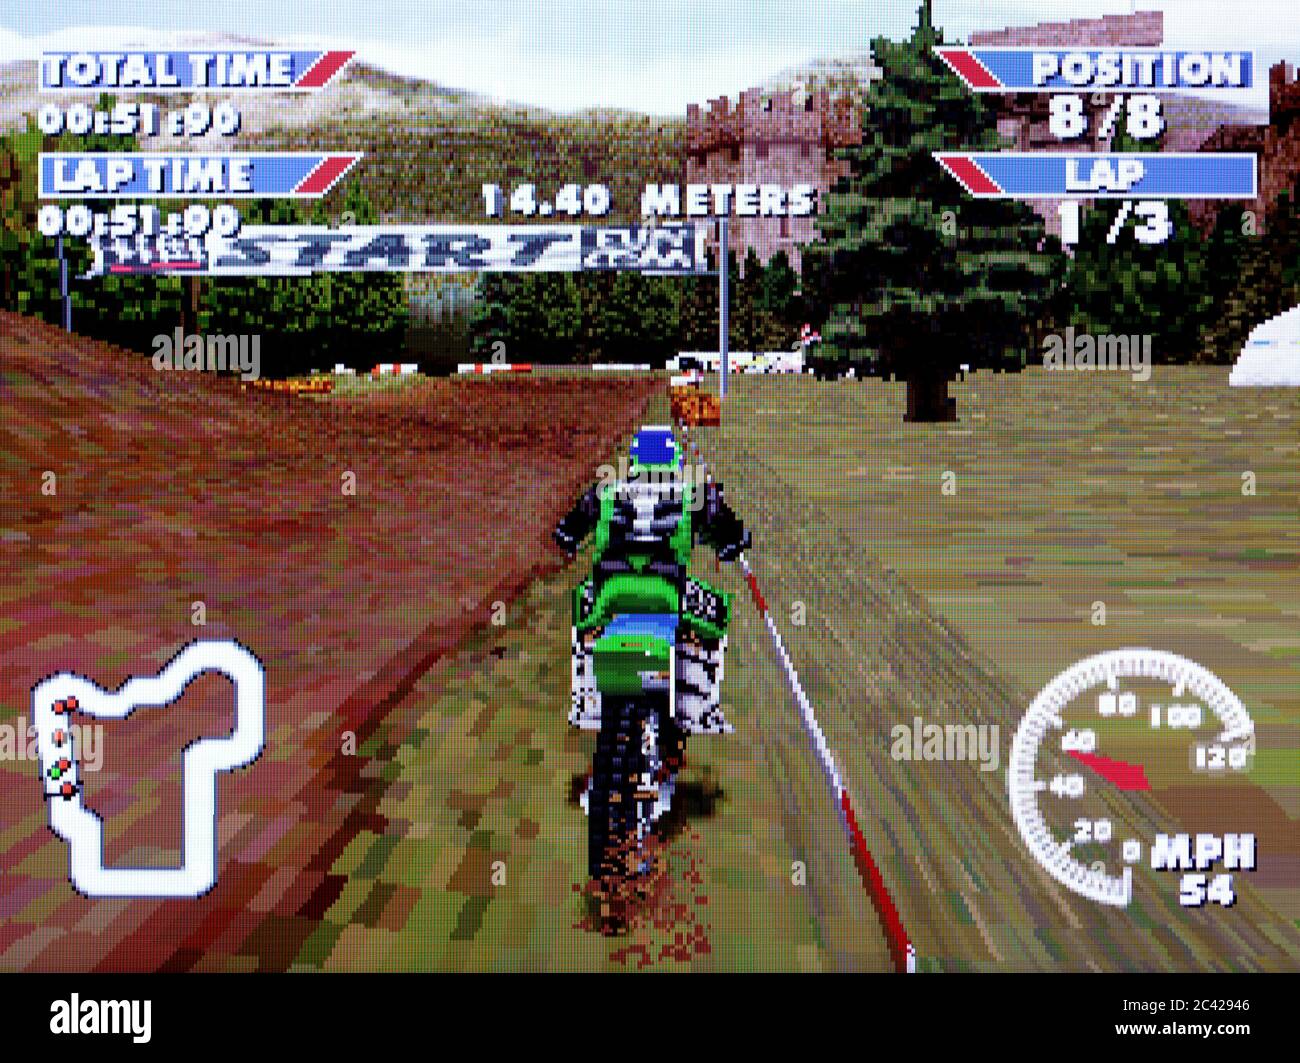 Championship Motocross featuring Ricky Carmichael - Sony Playstation 1 PS1 PSX - Editorial use only Stock Photo